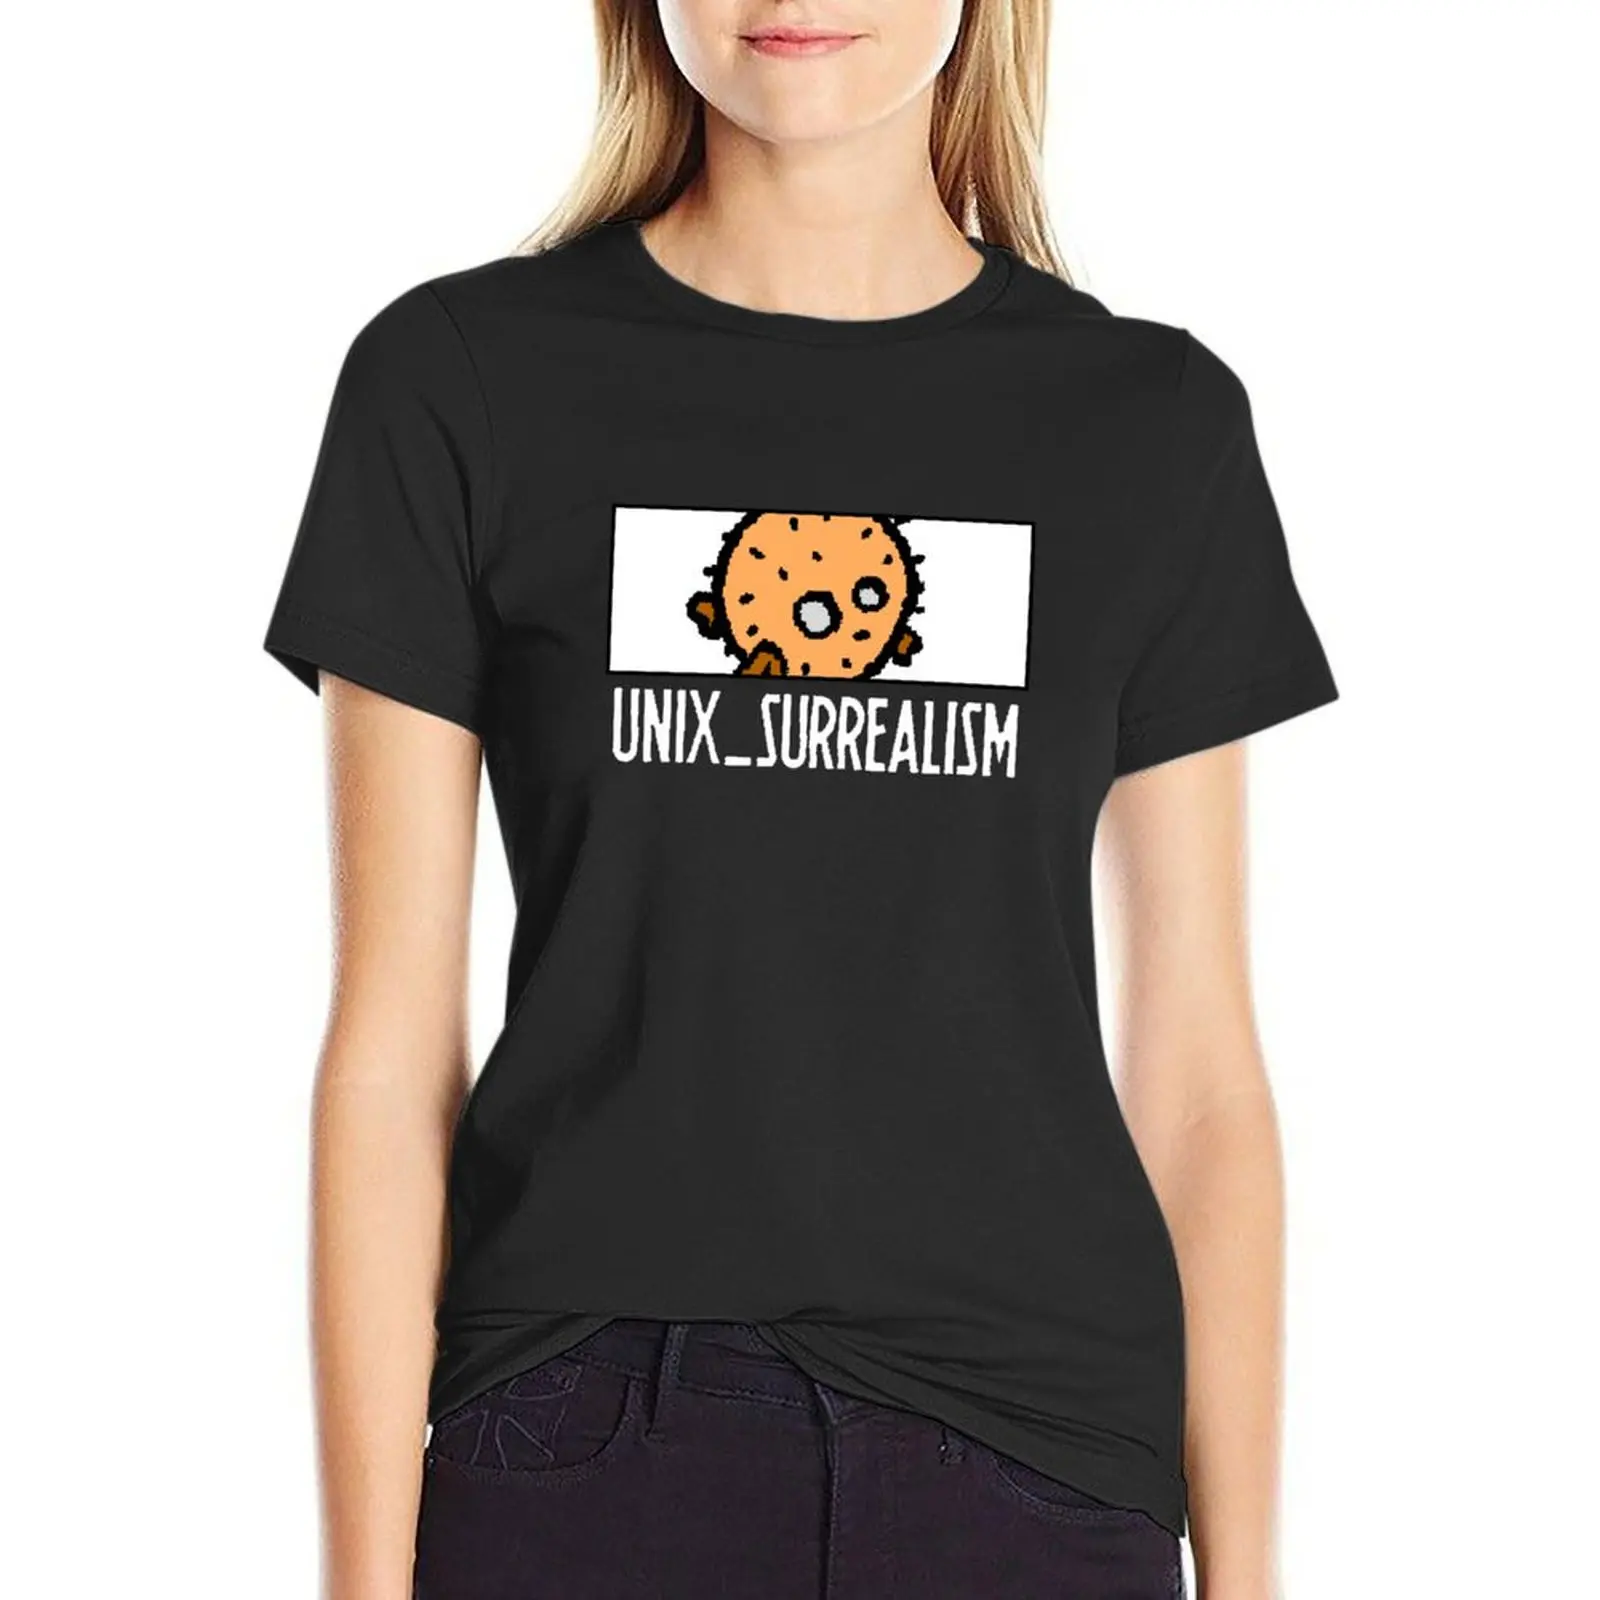 

Baby Puffy in unix_surrealism hi-tech lowres fashion [white text] T-shirt graphics vintage clothes Women's t-shirt